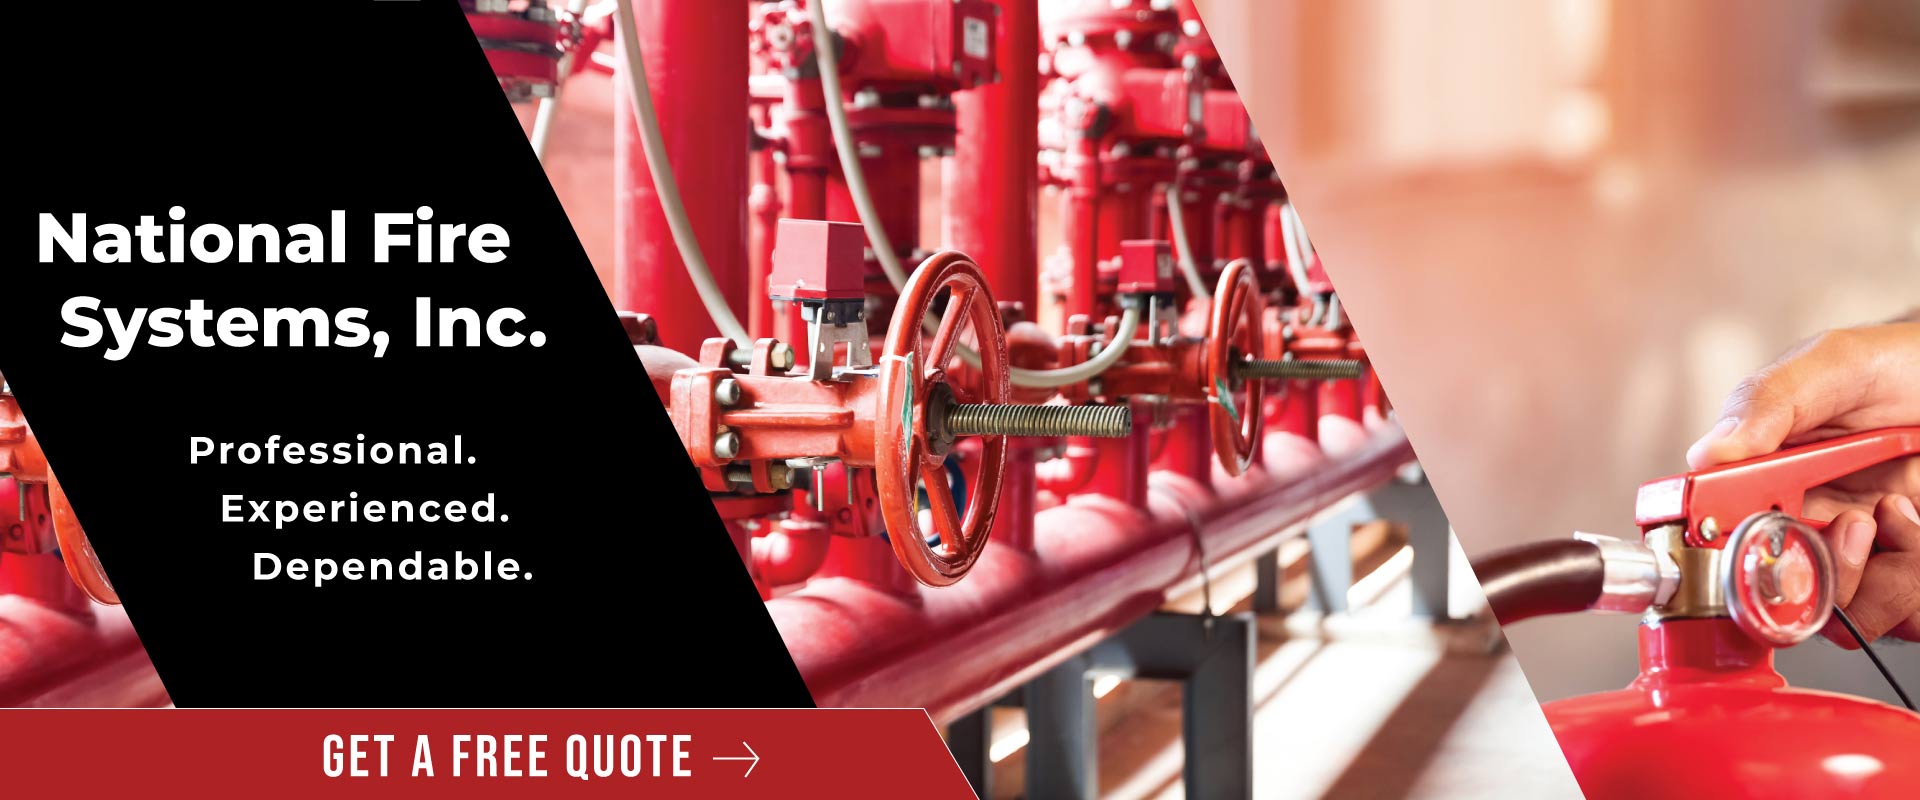 Professional fire systems company